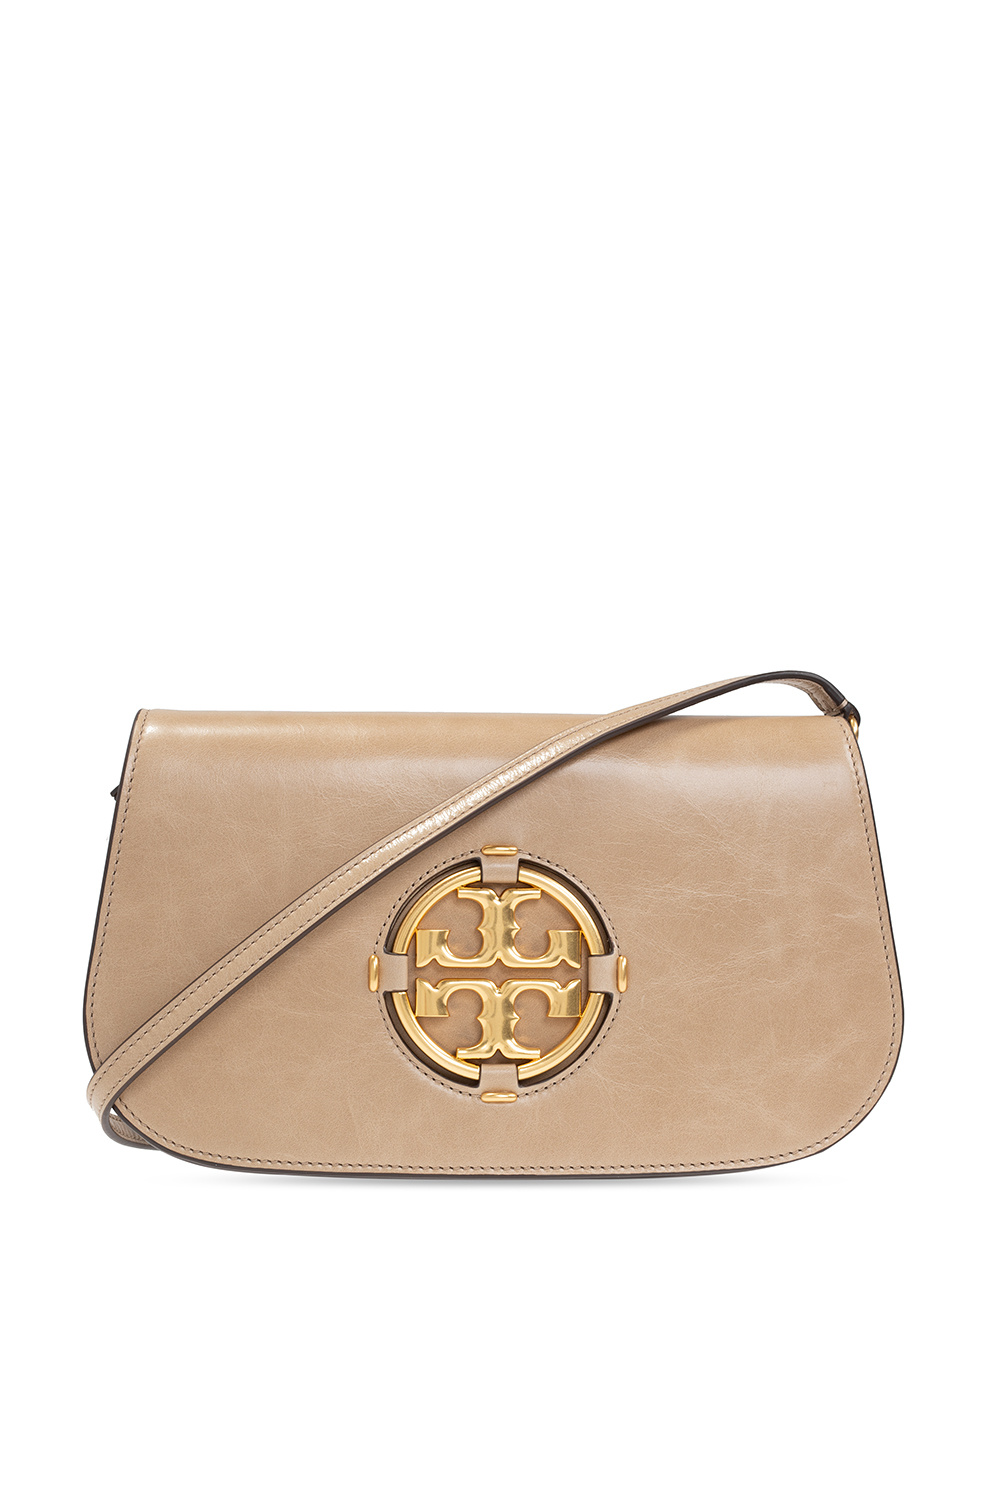 Tory Burch 'Miller Small' shoulder bag with logo | IetpShops | Women's Bags  | DKNY Bryant leather shoulder bag